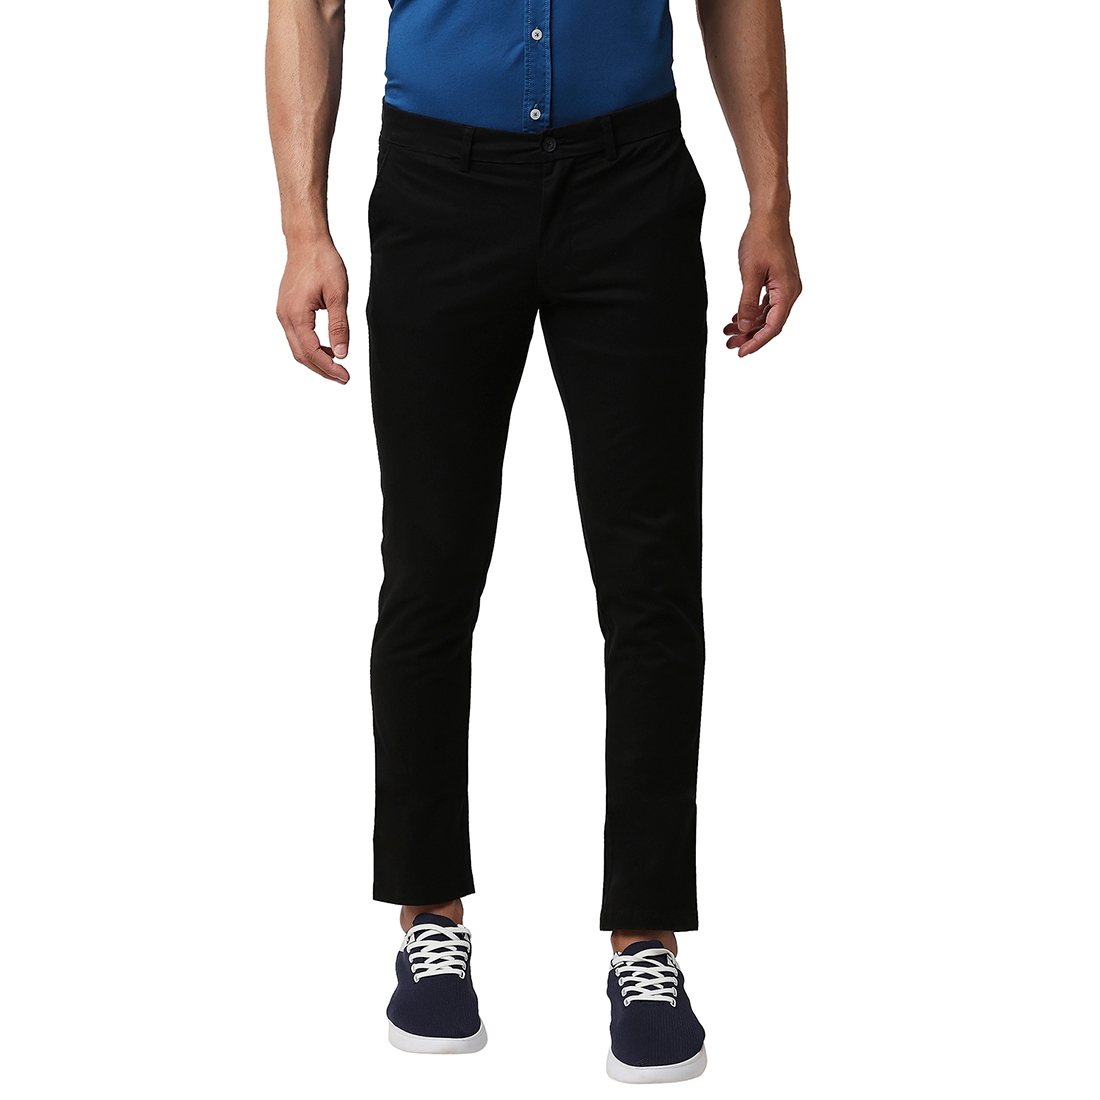 BASICS CASUAL PLAIN BLACK COTTON STRETCH TAPERED TROUSERS 